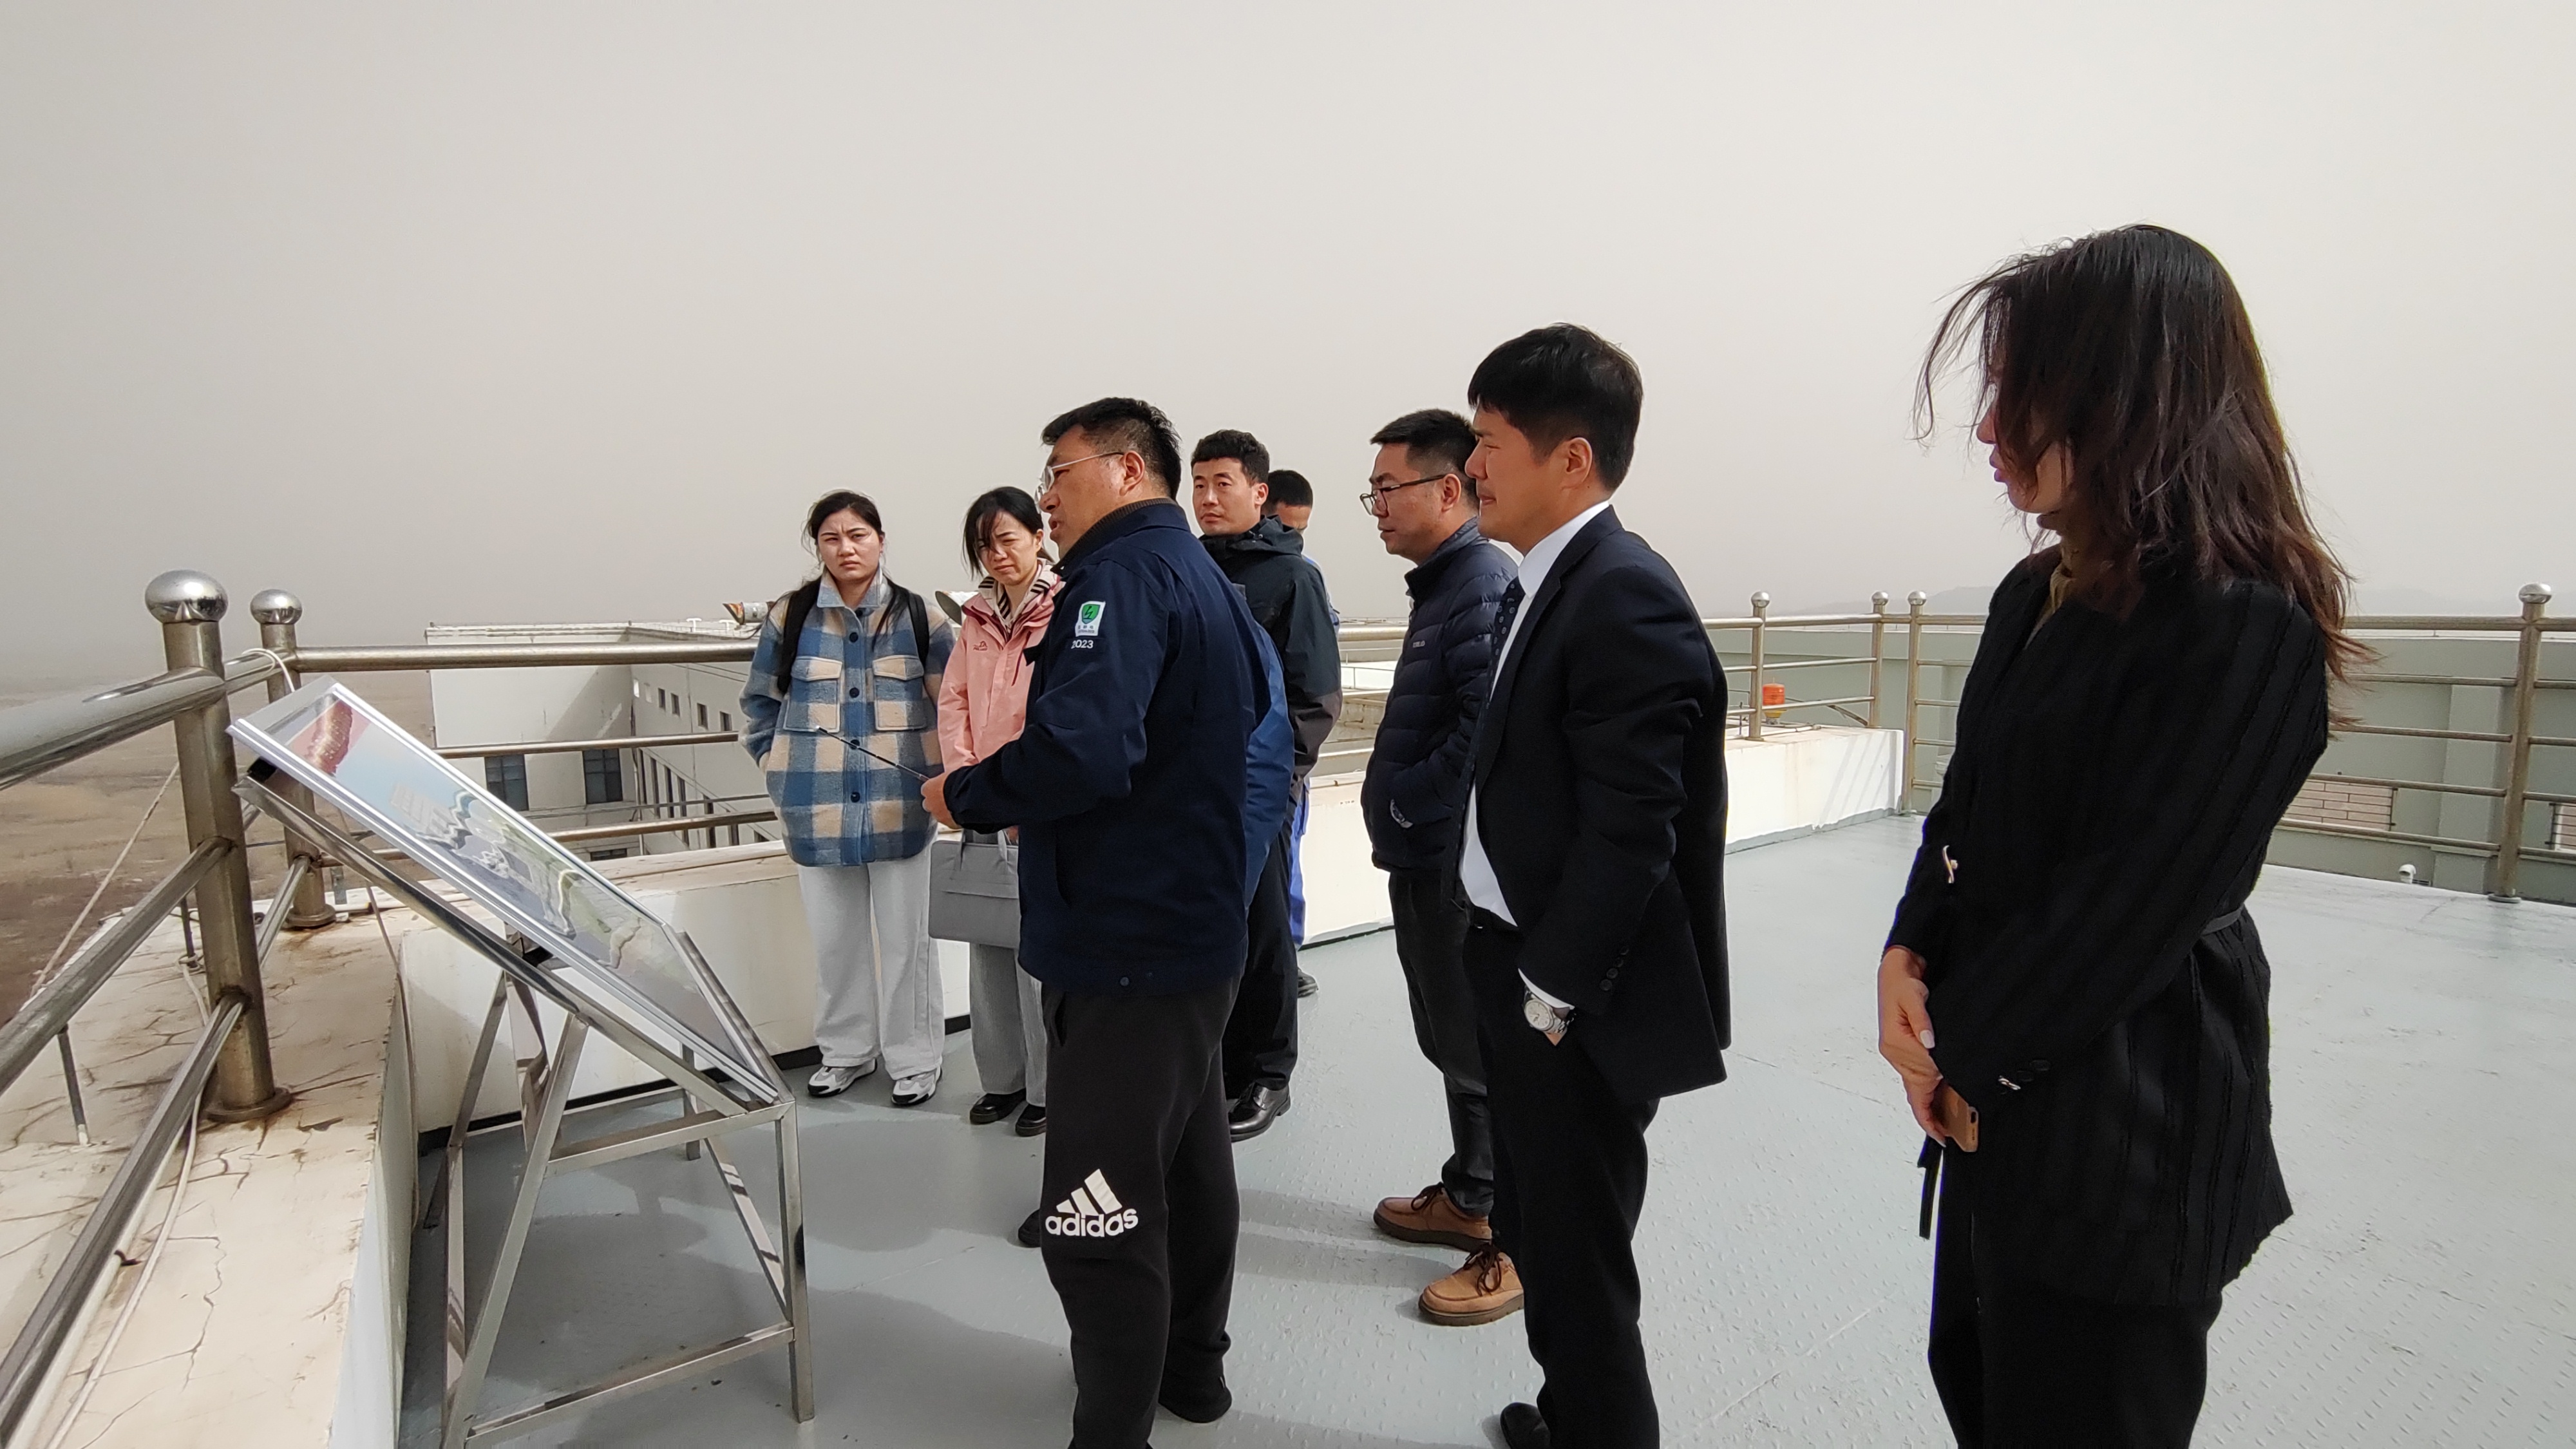 Mr. Su accompanied a central enterprise inspection team to conduct a special research on intelligent applications in the global perspective of smart fire protection projects